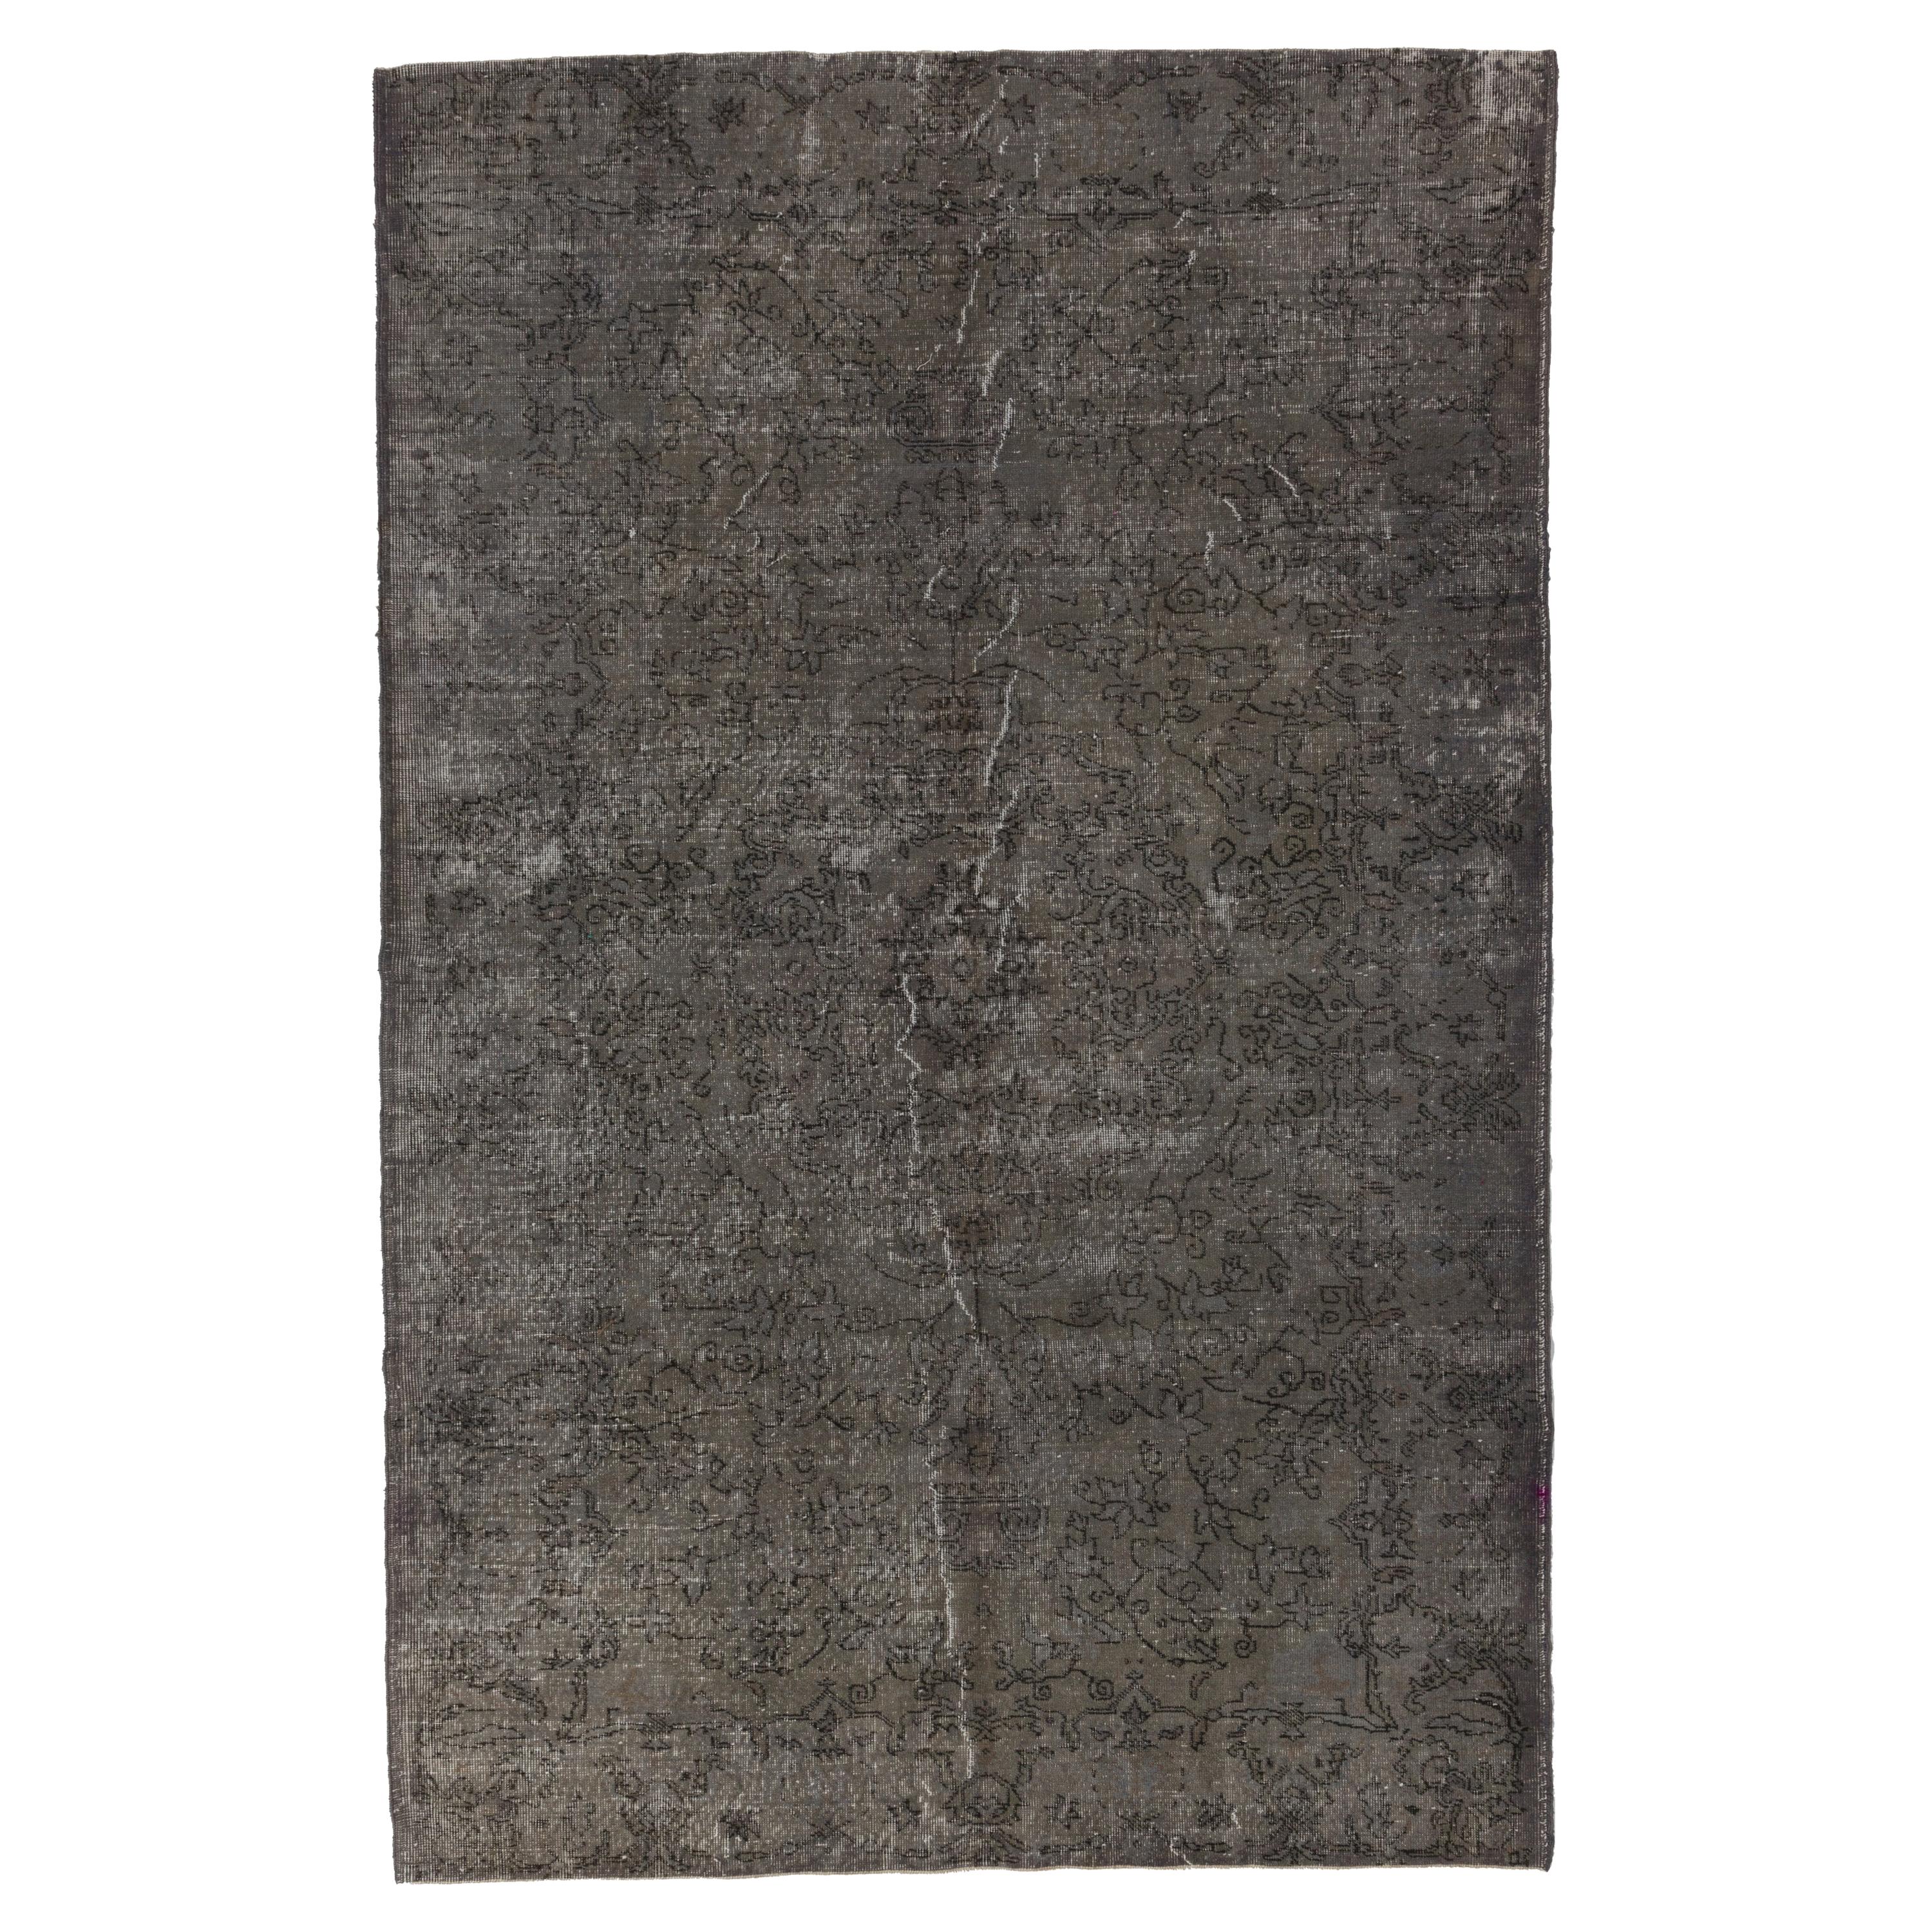 6.5x10 Ft Vintage Rug in Gray, Hand-Made Carpet for Modern Home and Office Decor For Sale